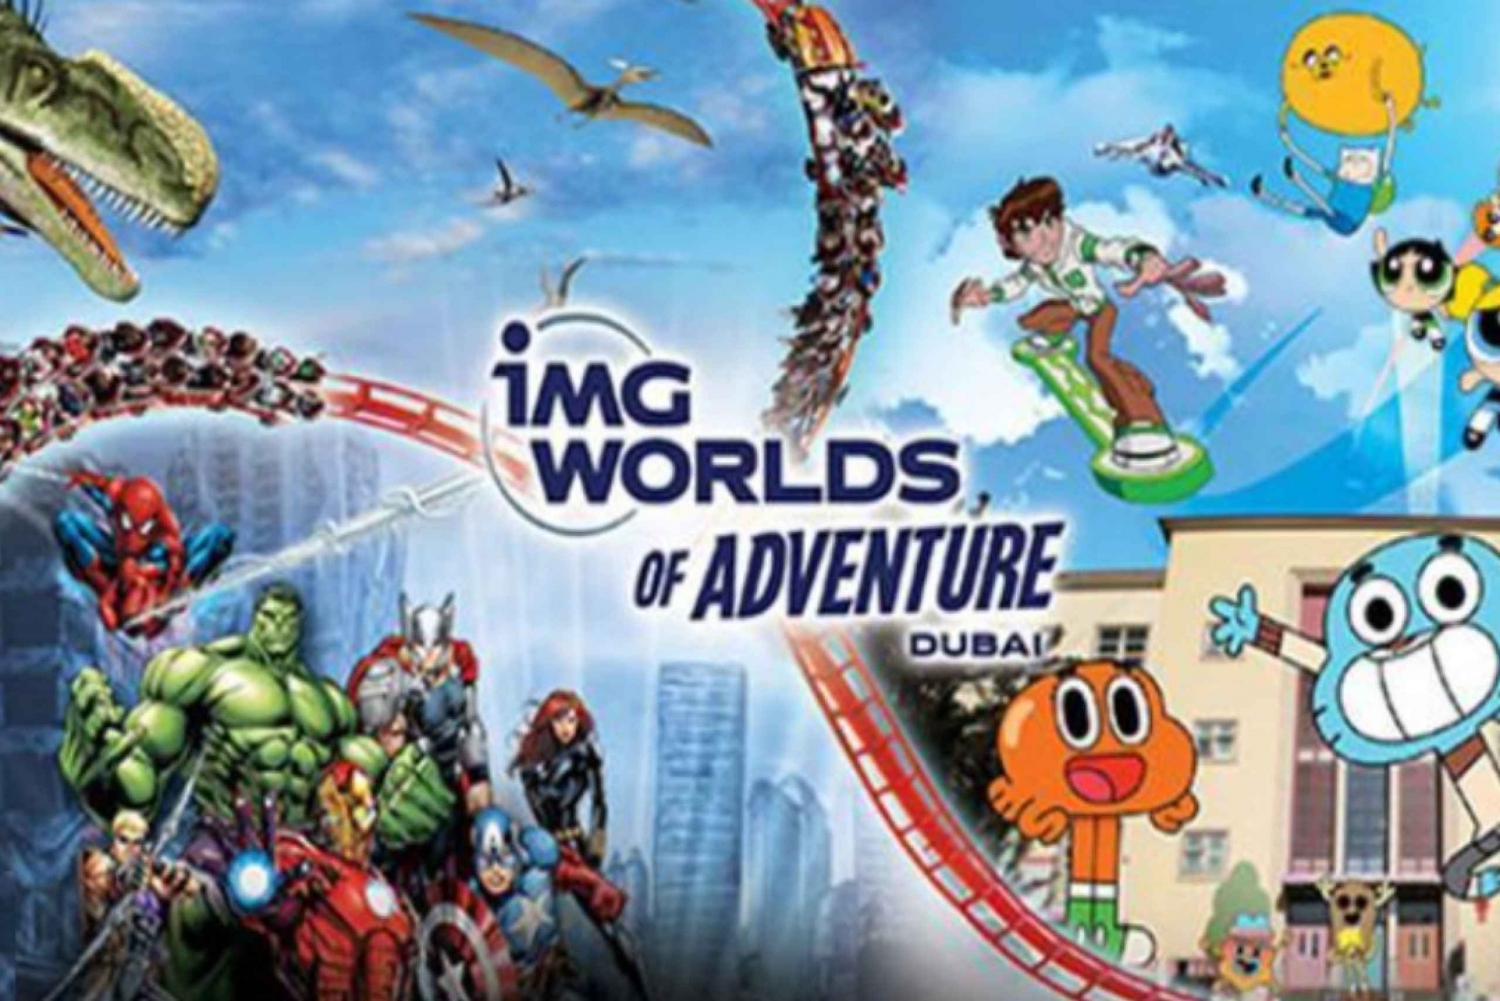 A day at IMG Worlds of adventure Dubai planned from A to Z